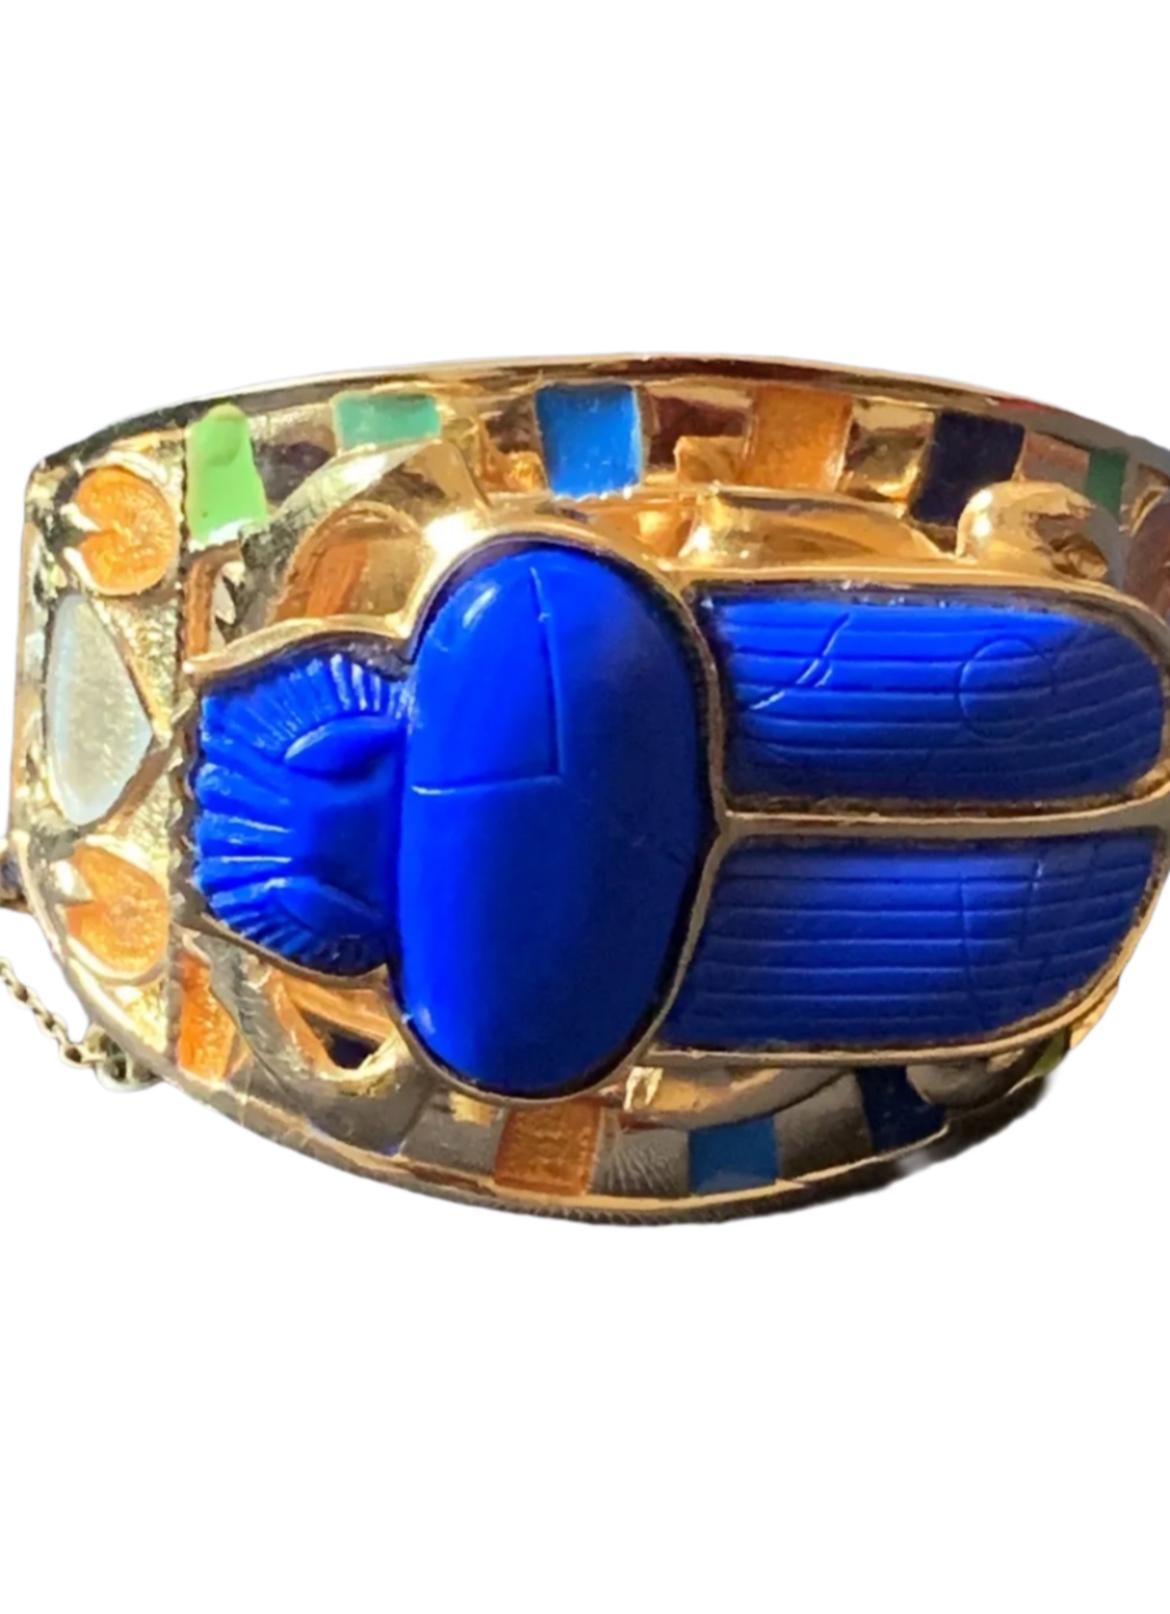 Spectacular Super Rare 1972 Thomas Fattorini Scarab bangle hinged bracelet.

This stunning cuff was part of a collection commission by the Times newspaper, originally sold at the British Museum London during the Tutankhamun exhibition in 1972. 

A